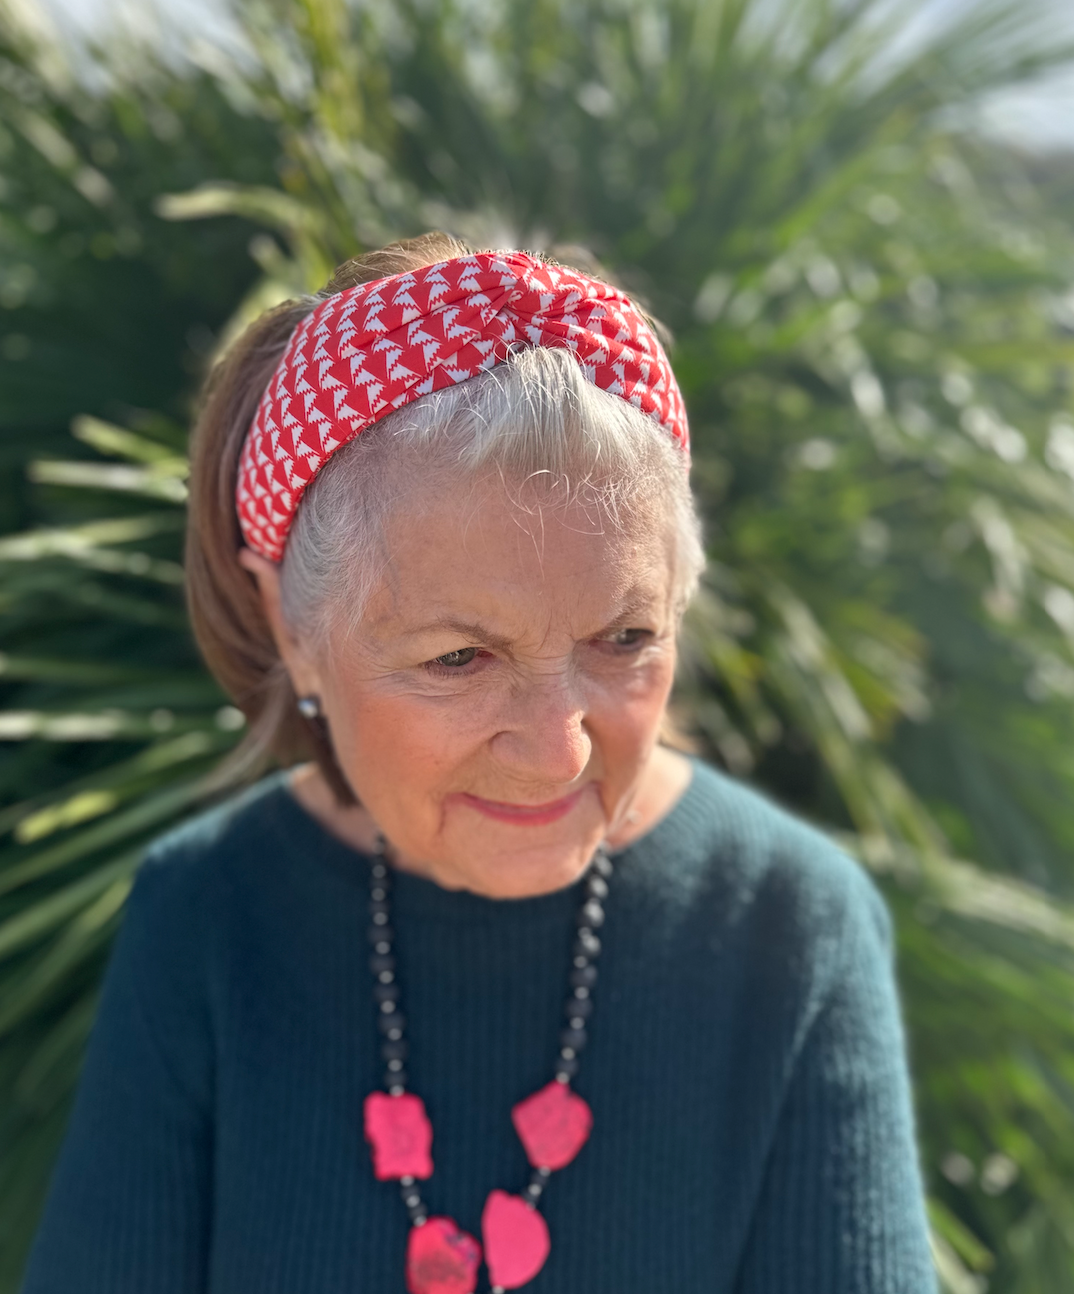 Twisted Alice Headband - Liberty of London Jonathan Print in red and white